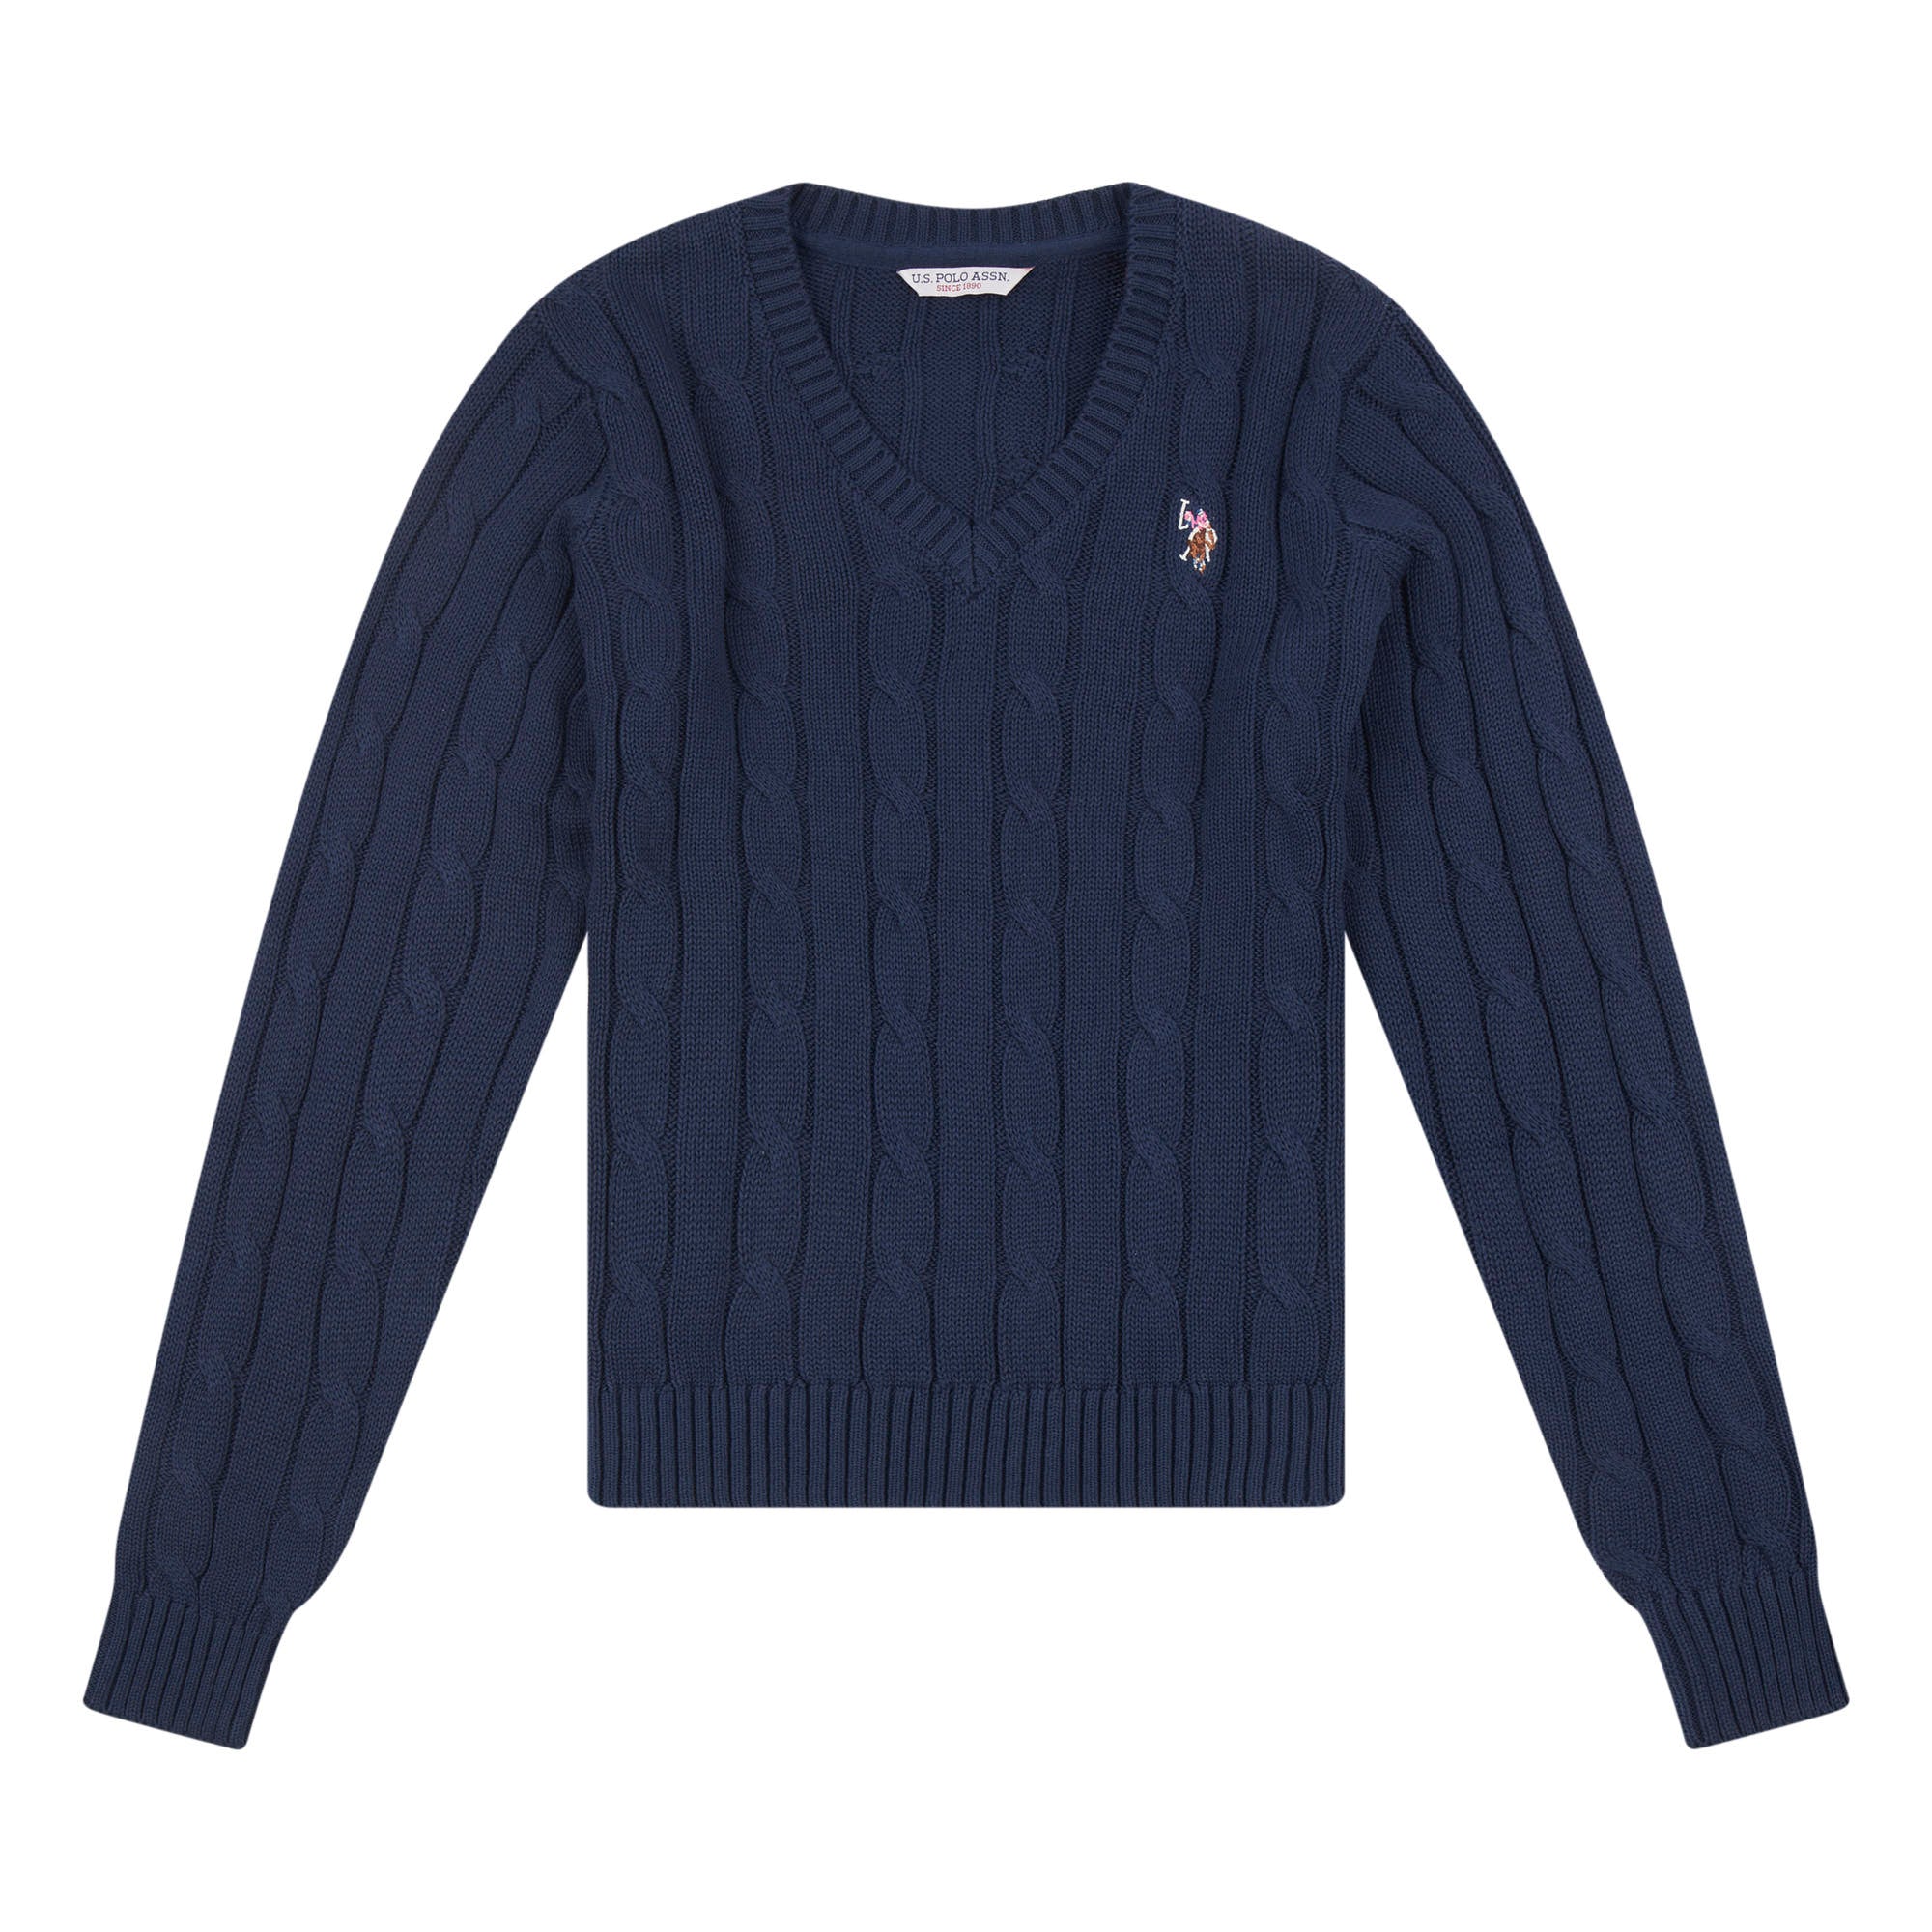 Womens V-Neck Cable Jumper in Navy Iris